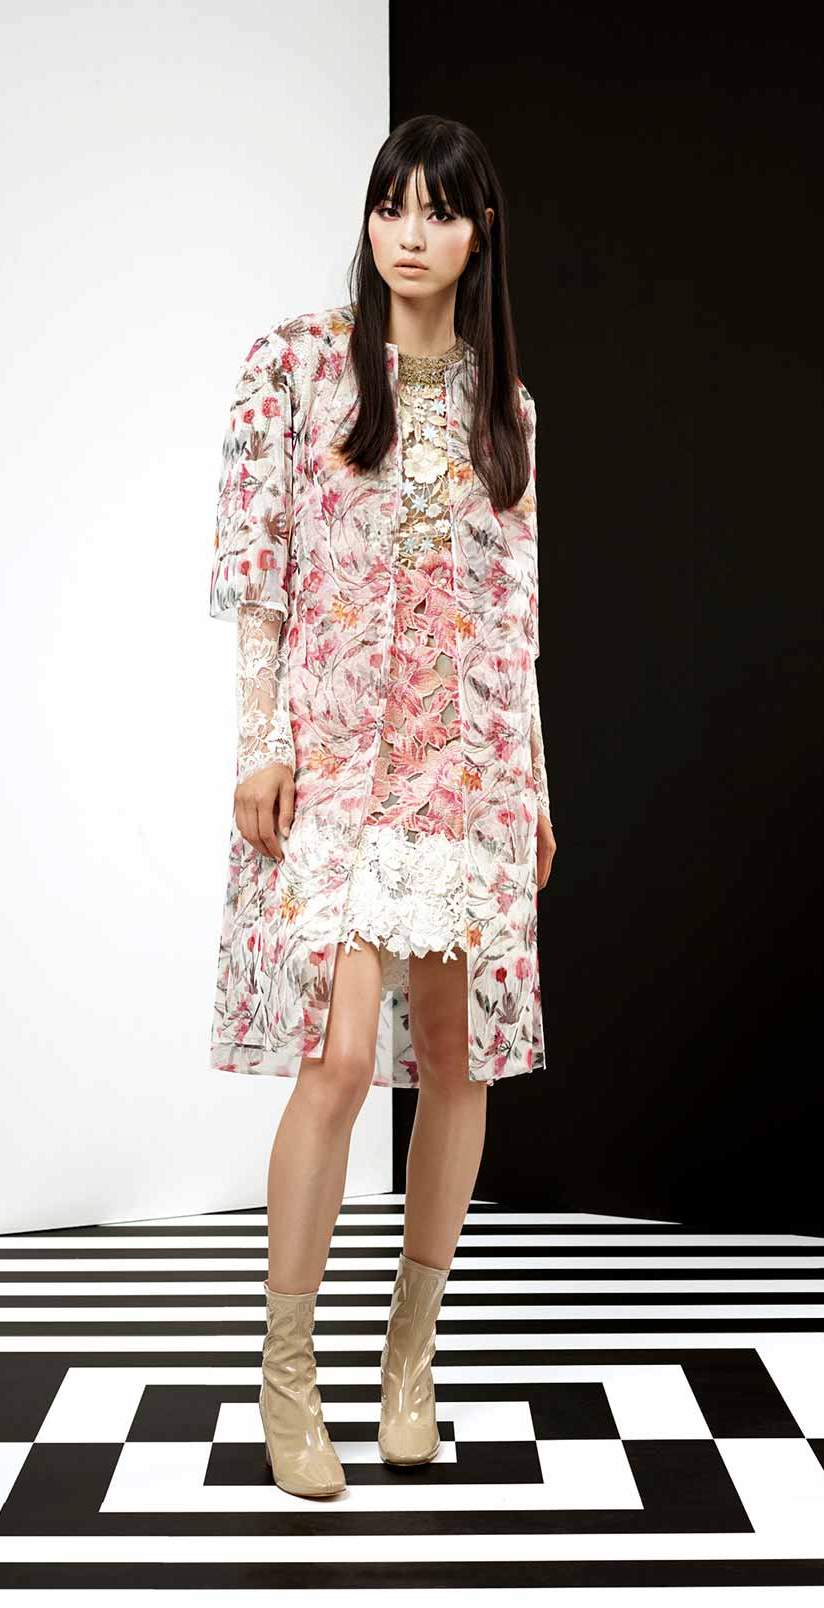 Whtie and soft pink babydoll dress with box-neckline and a matching print silk coat